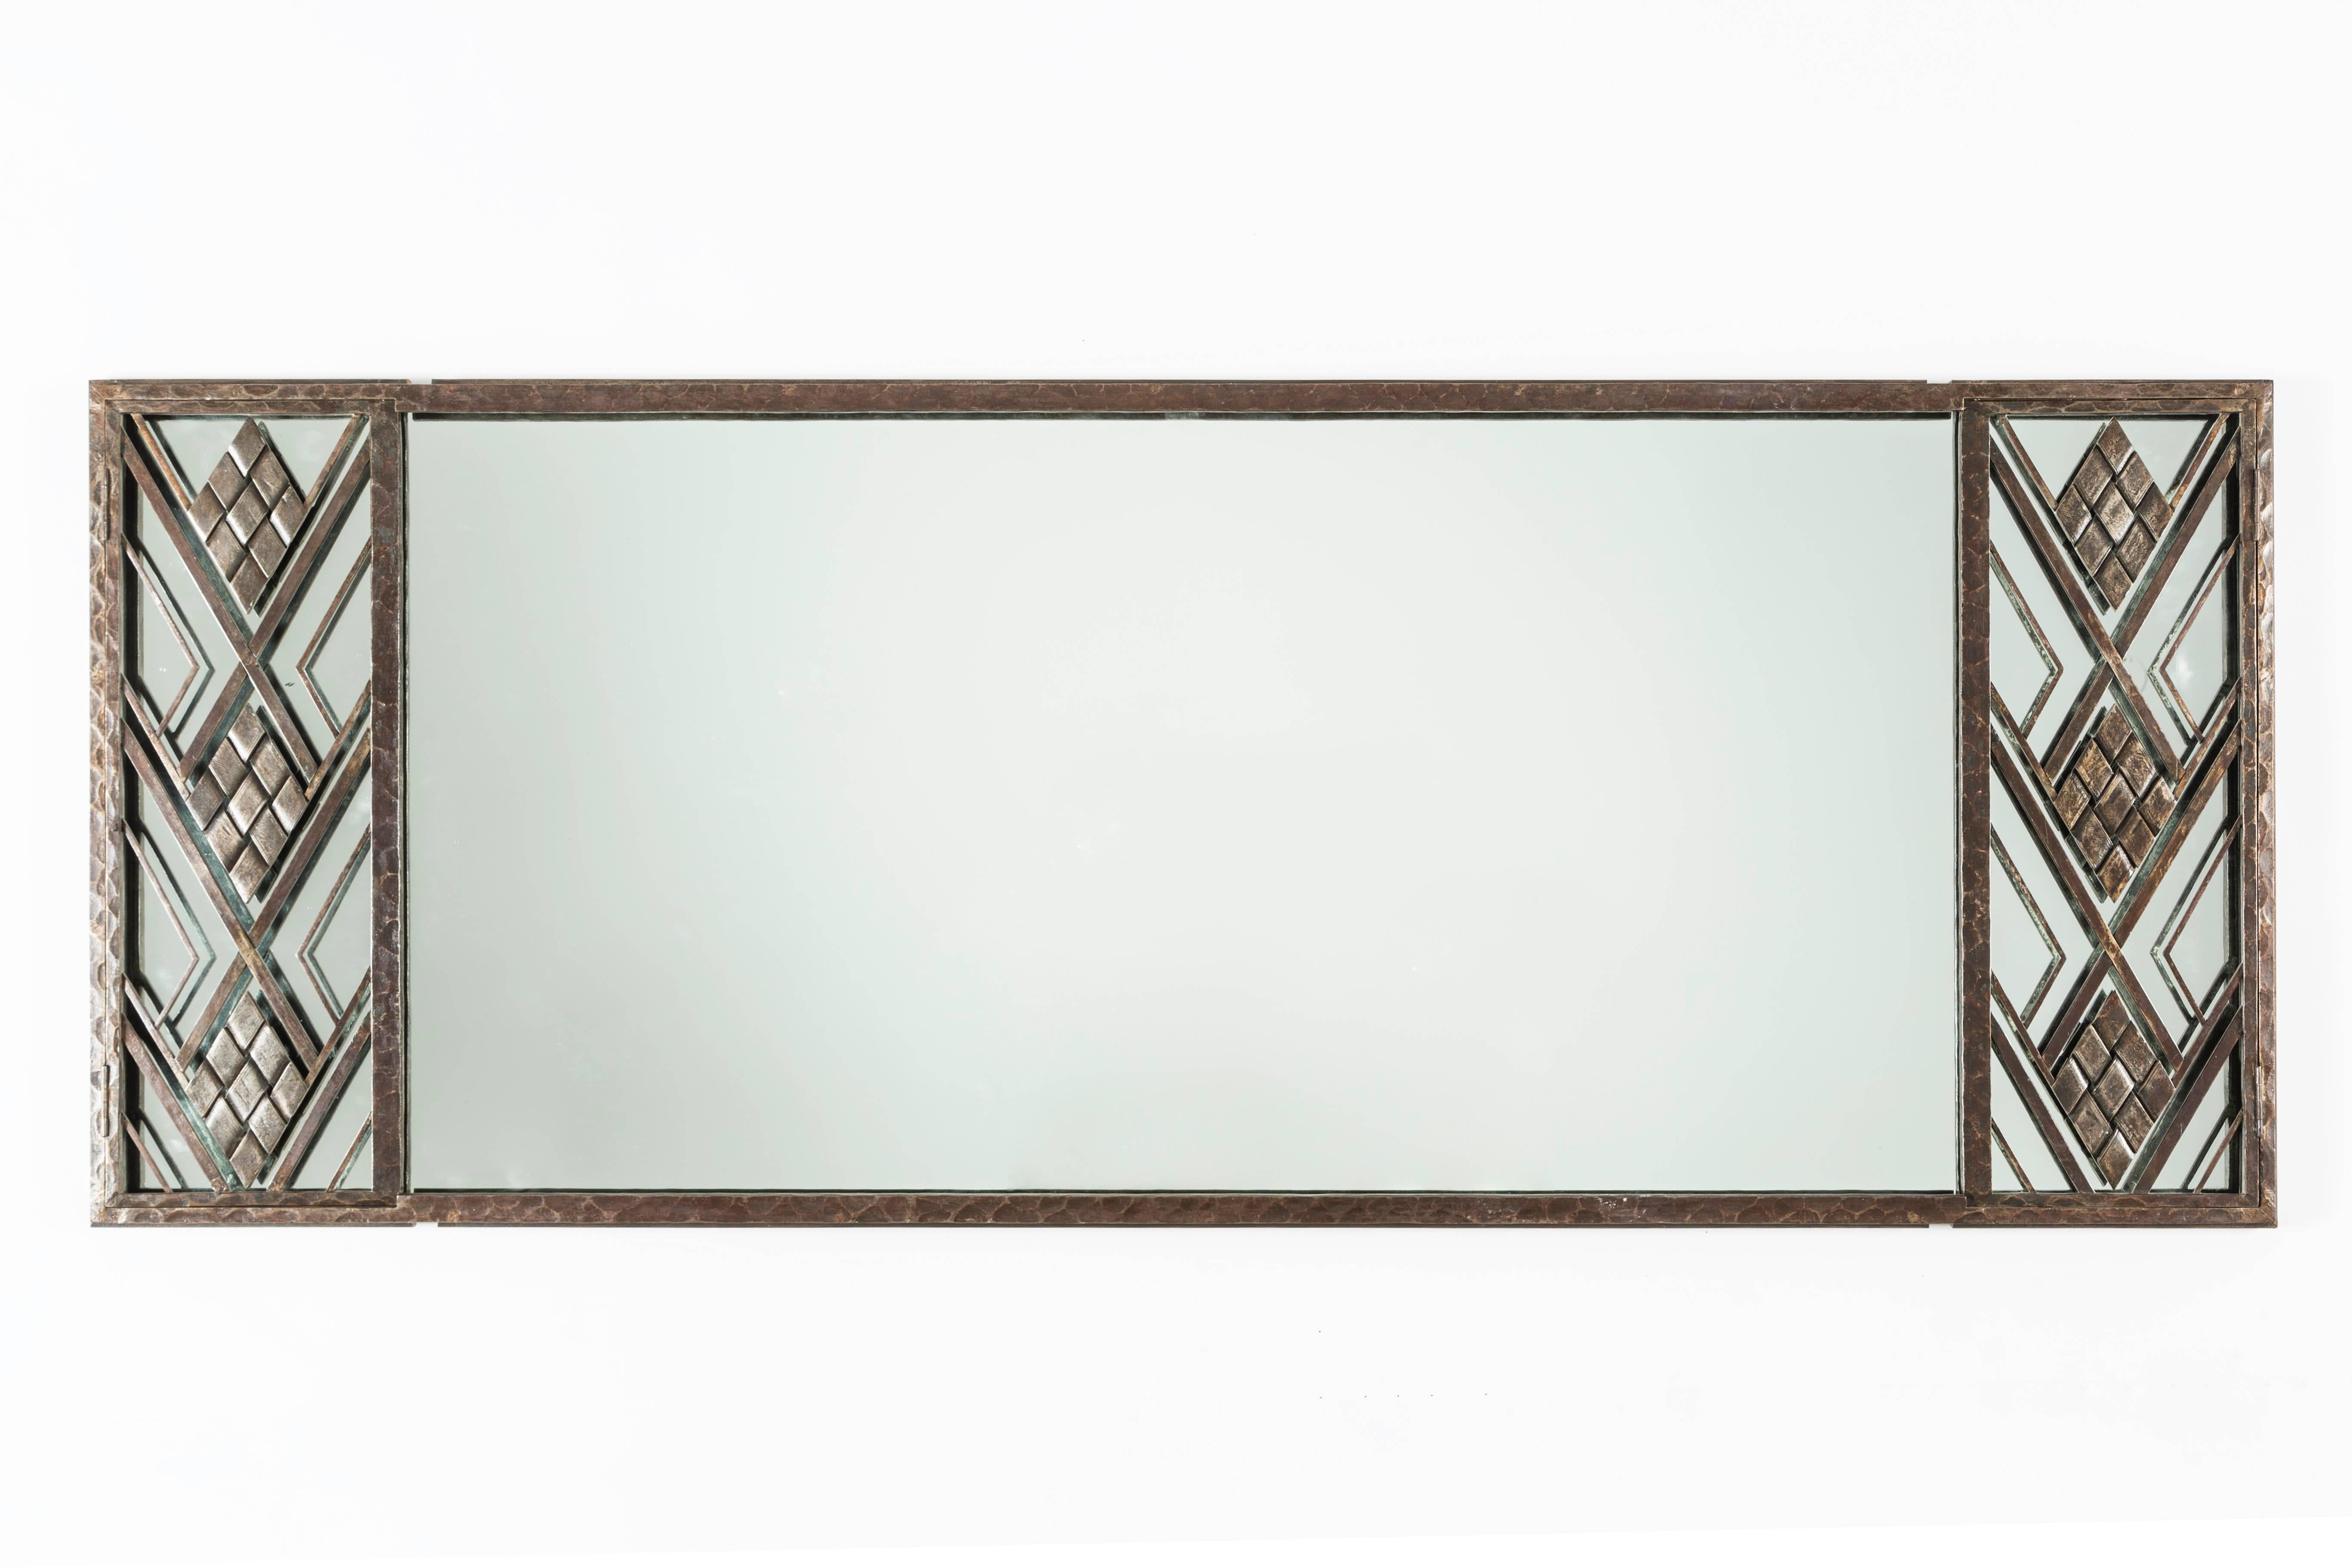 Beautiful, unusual French Art Deco frame.
Welded steel and beautiful embossing throughout this frame.
An ingenious way, is found as lateral doors open for easy access for cleaning.